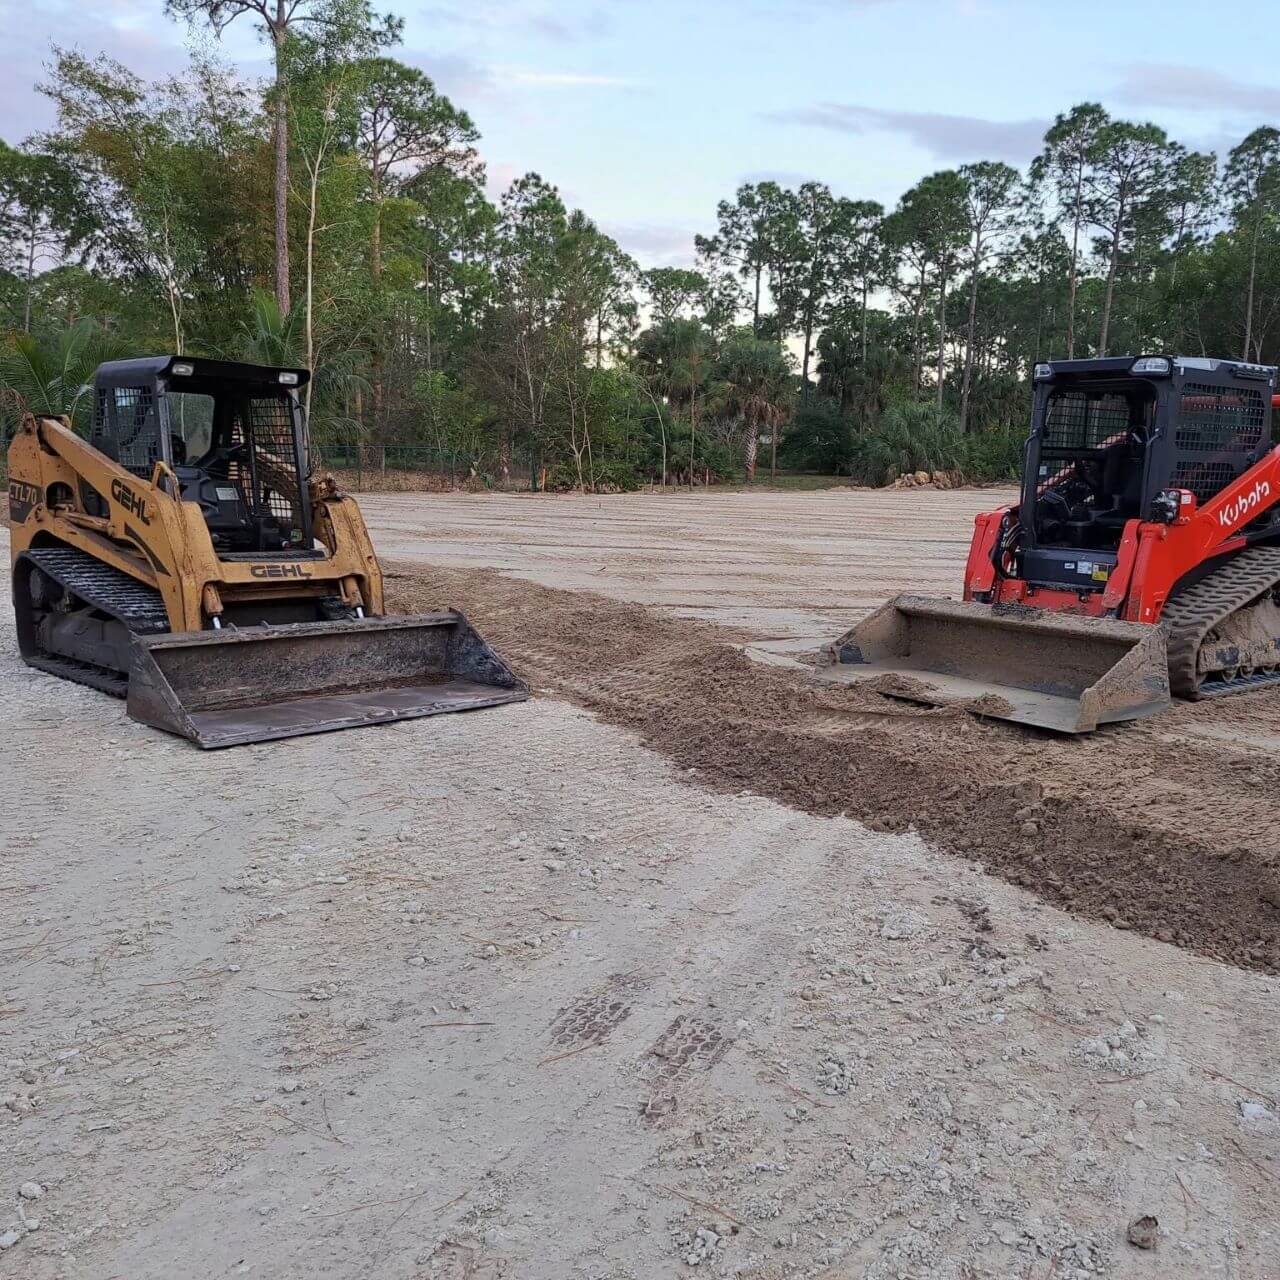 Two skid steer loaders are parked in a dirt field.